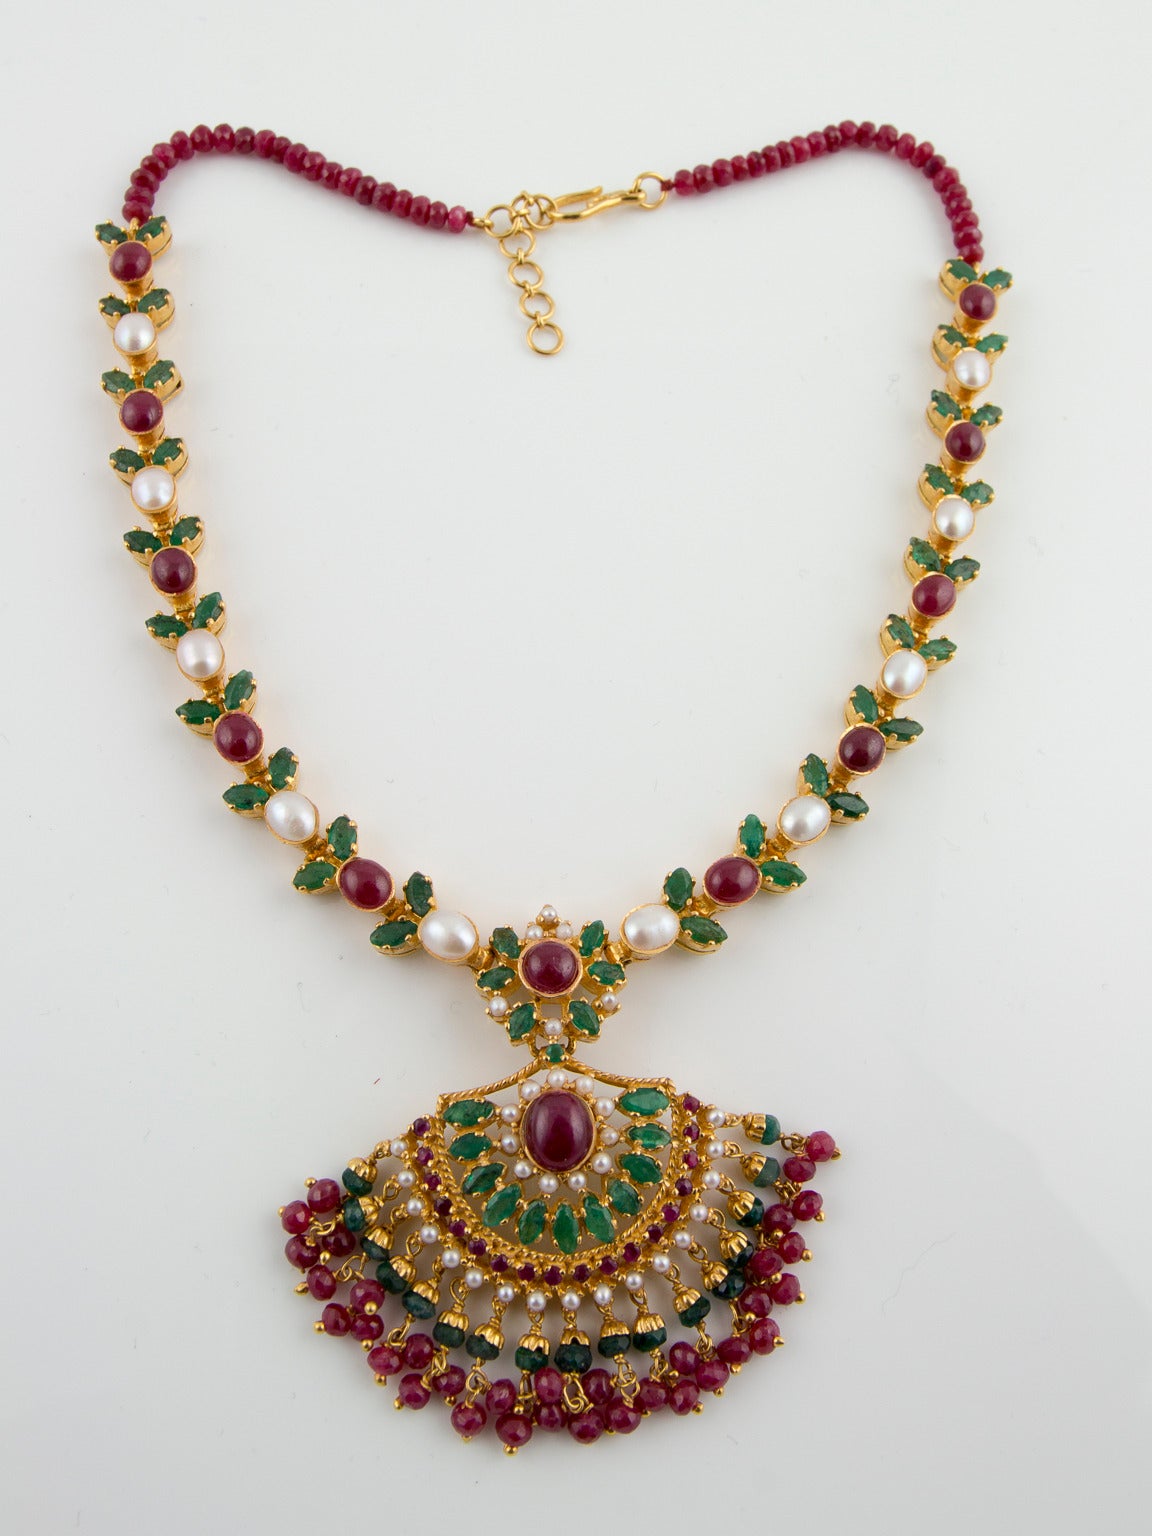 An elaborate traditional Indian Wedding set, comprising a necklet, bracelet & earrings of rubies, emeralds & pearls set in 22 carat gold. Necklet features a tasselled, fan-shaped pendant set with a deep red cabochon ruby flanked by semi-circular